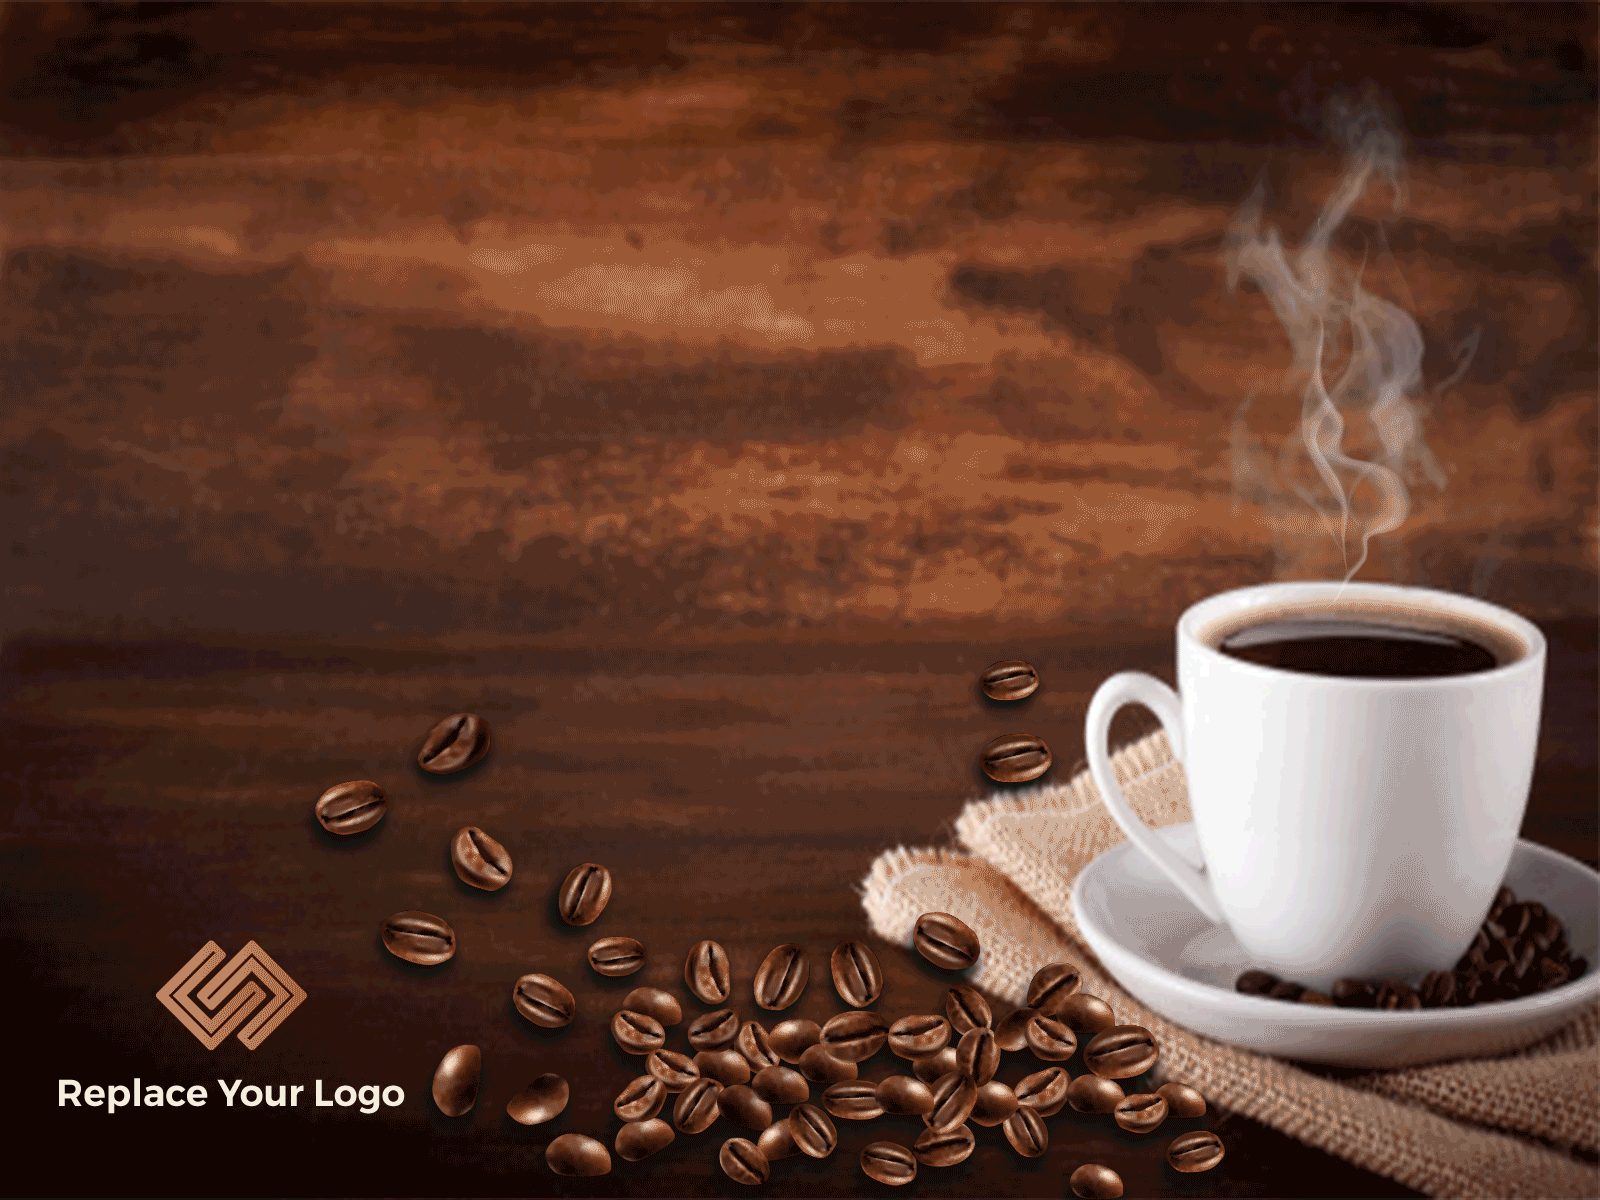 Free Animated Coffee Beans With Steam For Social Media Designs